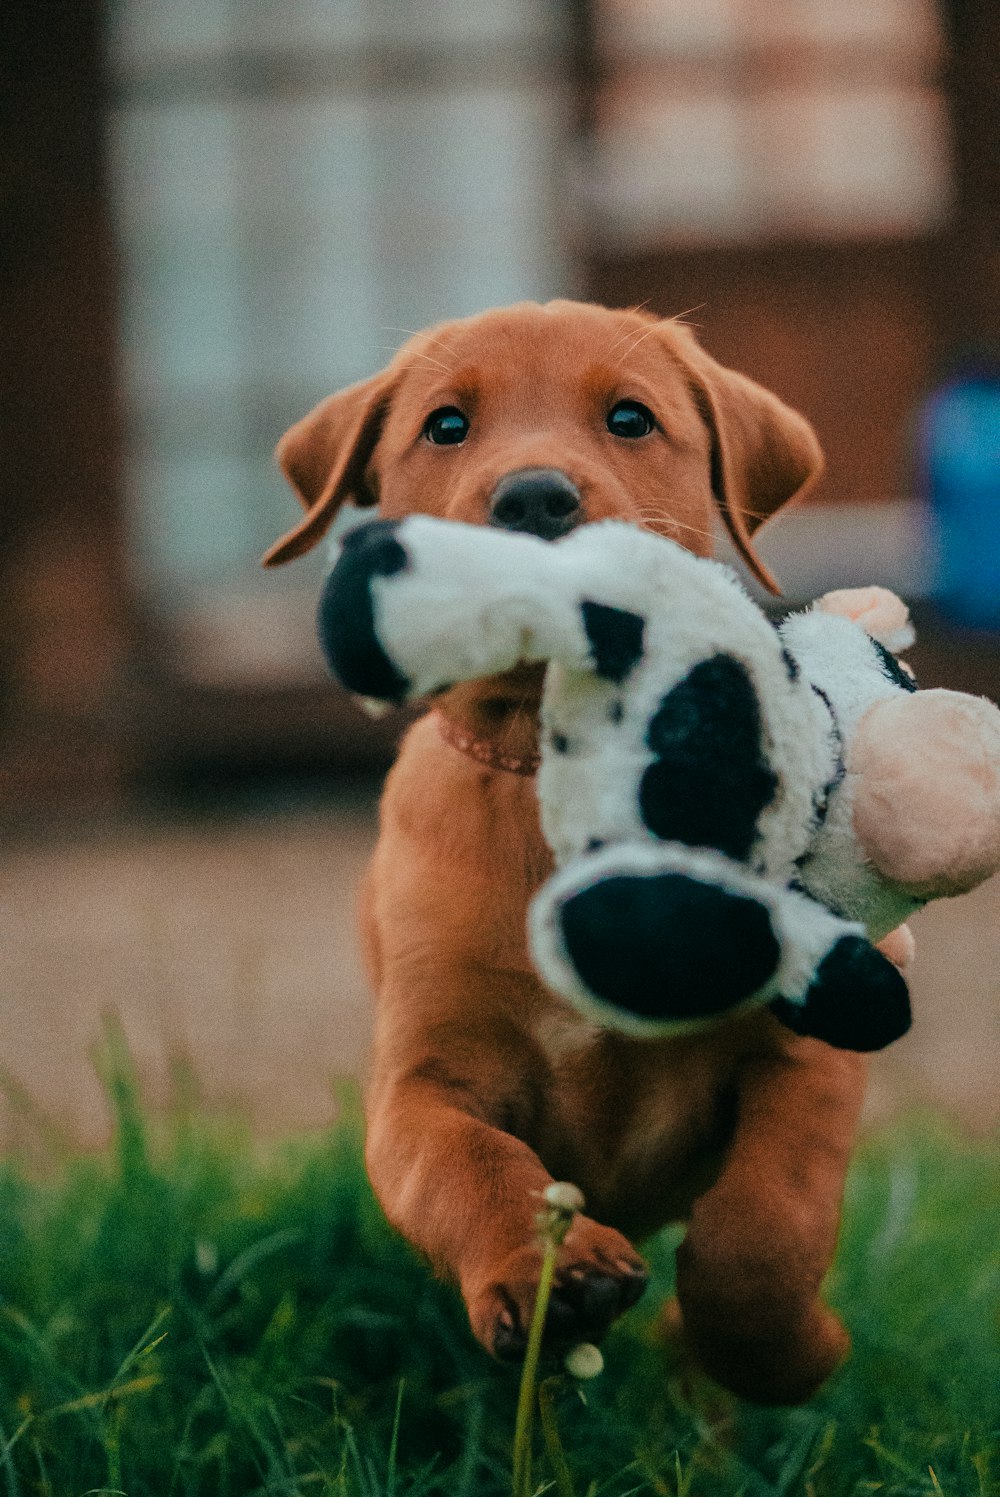 a brown dog holding a stuffed animal in its mouth